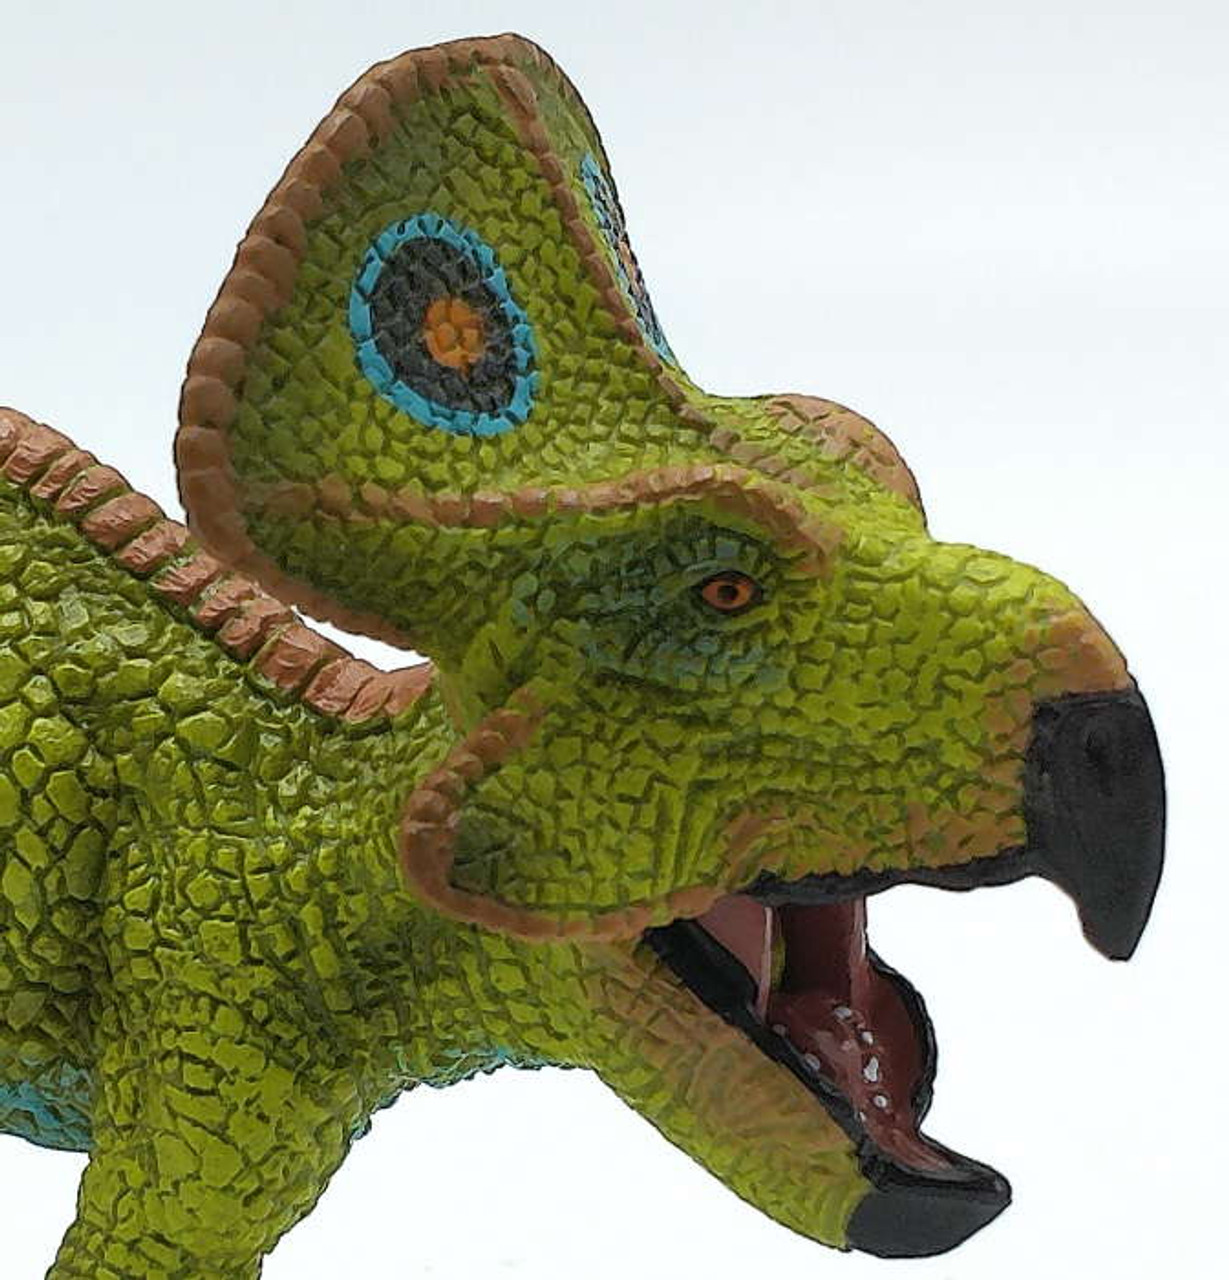 Papo Protoceratops #55064 - New Papo 2022 - Moveable Jaw